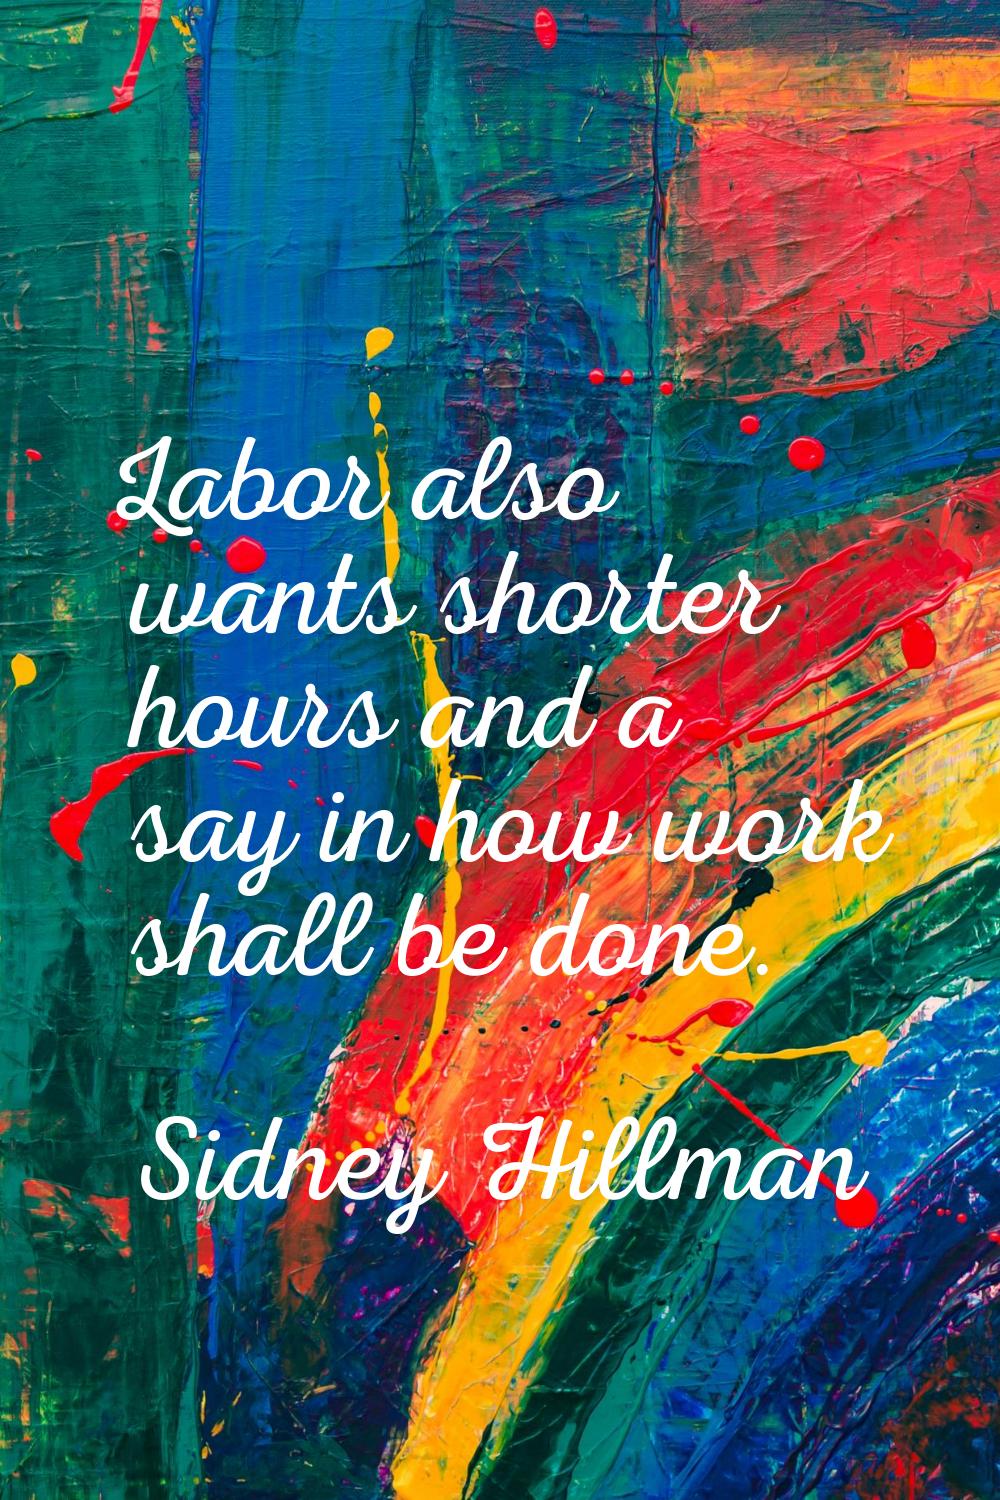 Labor also wants shorter hours and a say in how work shall be done.